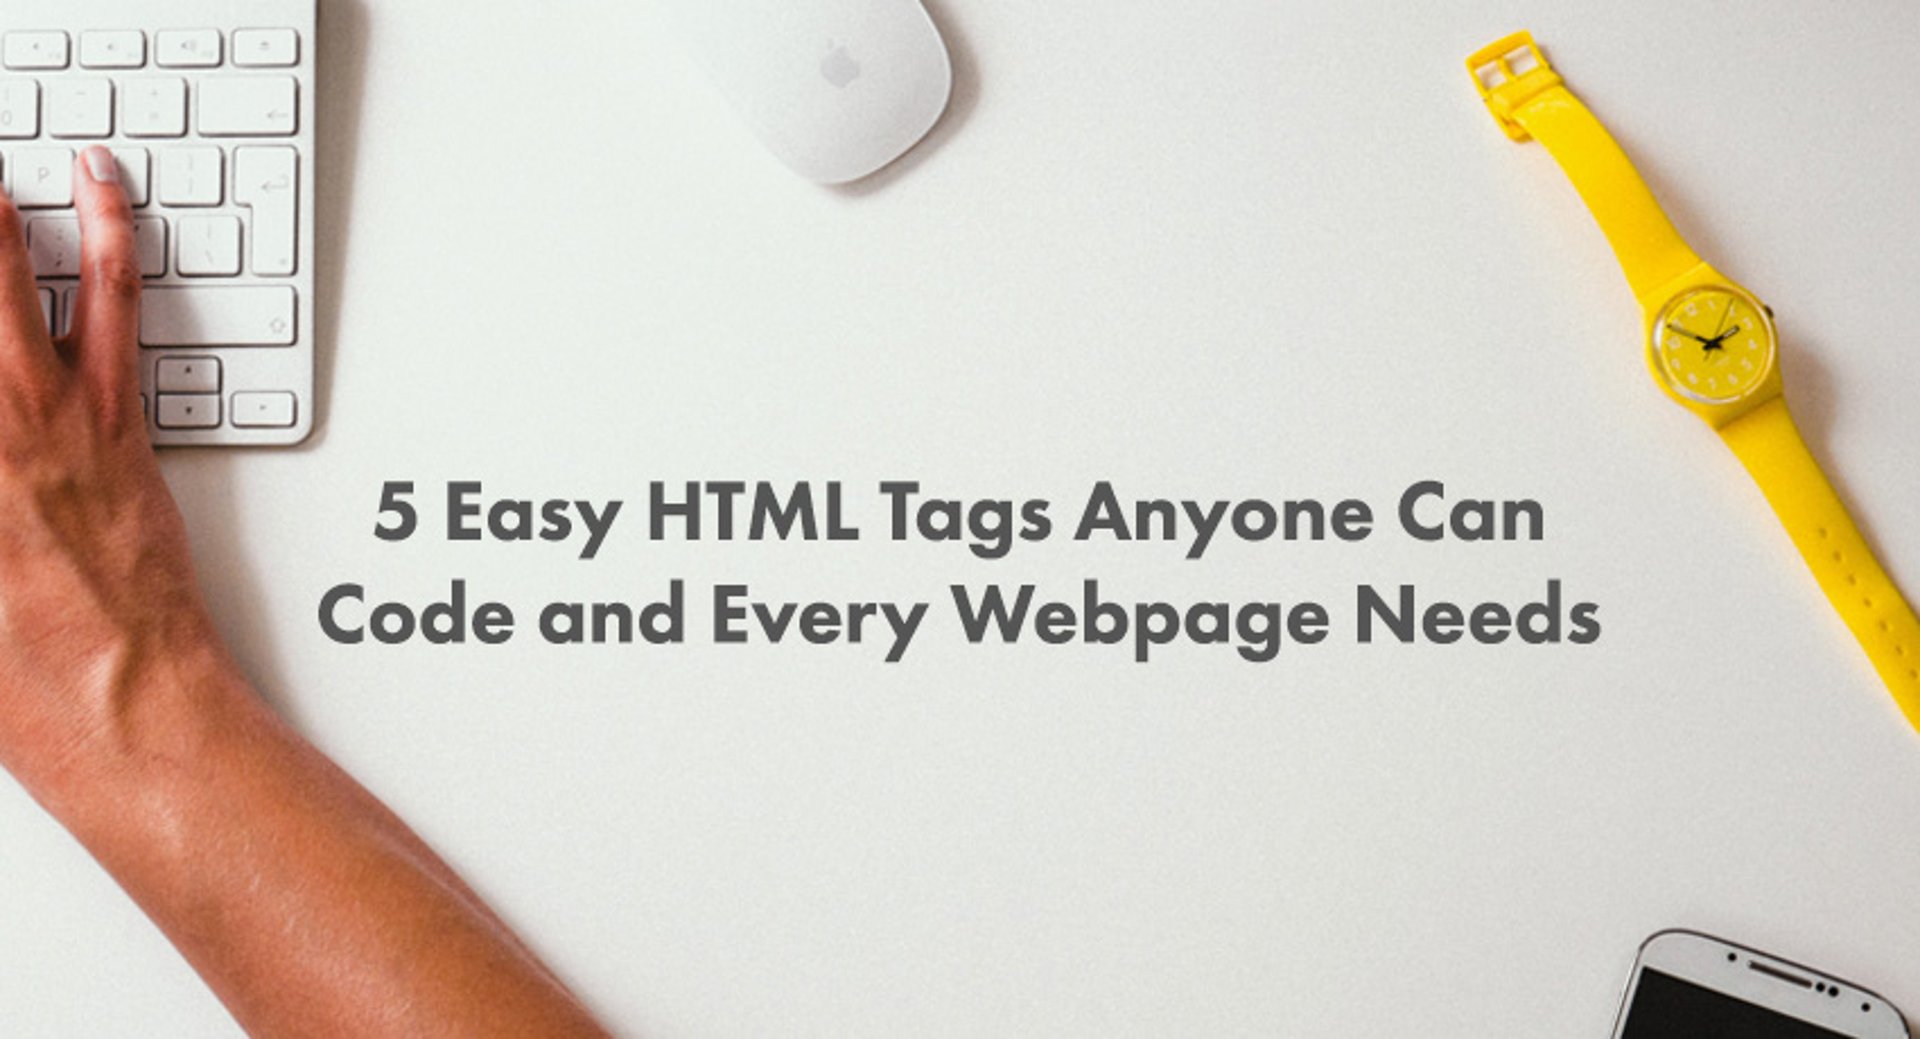 5 Easy HTML Tags Every Webpage Needs